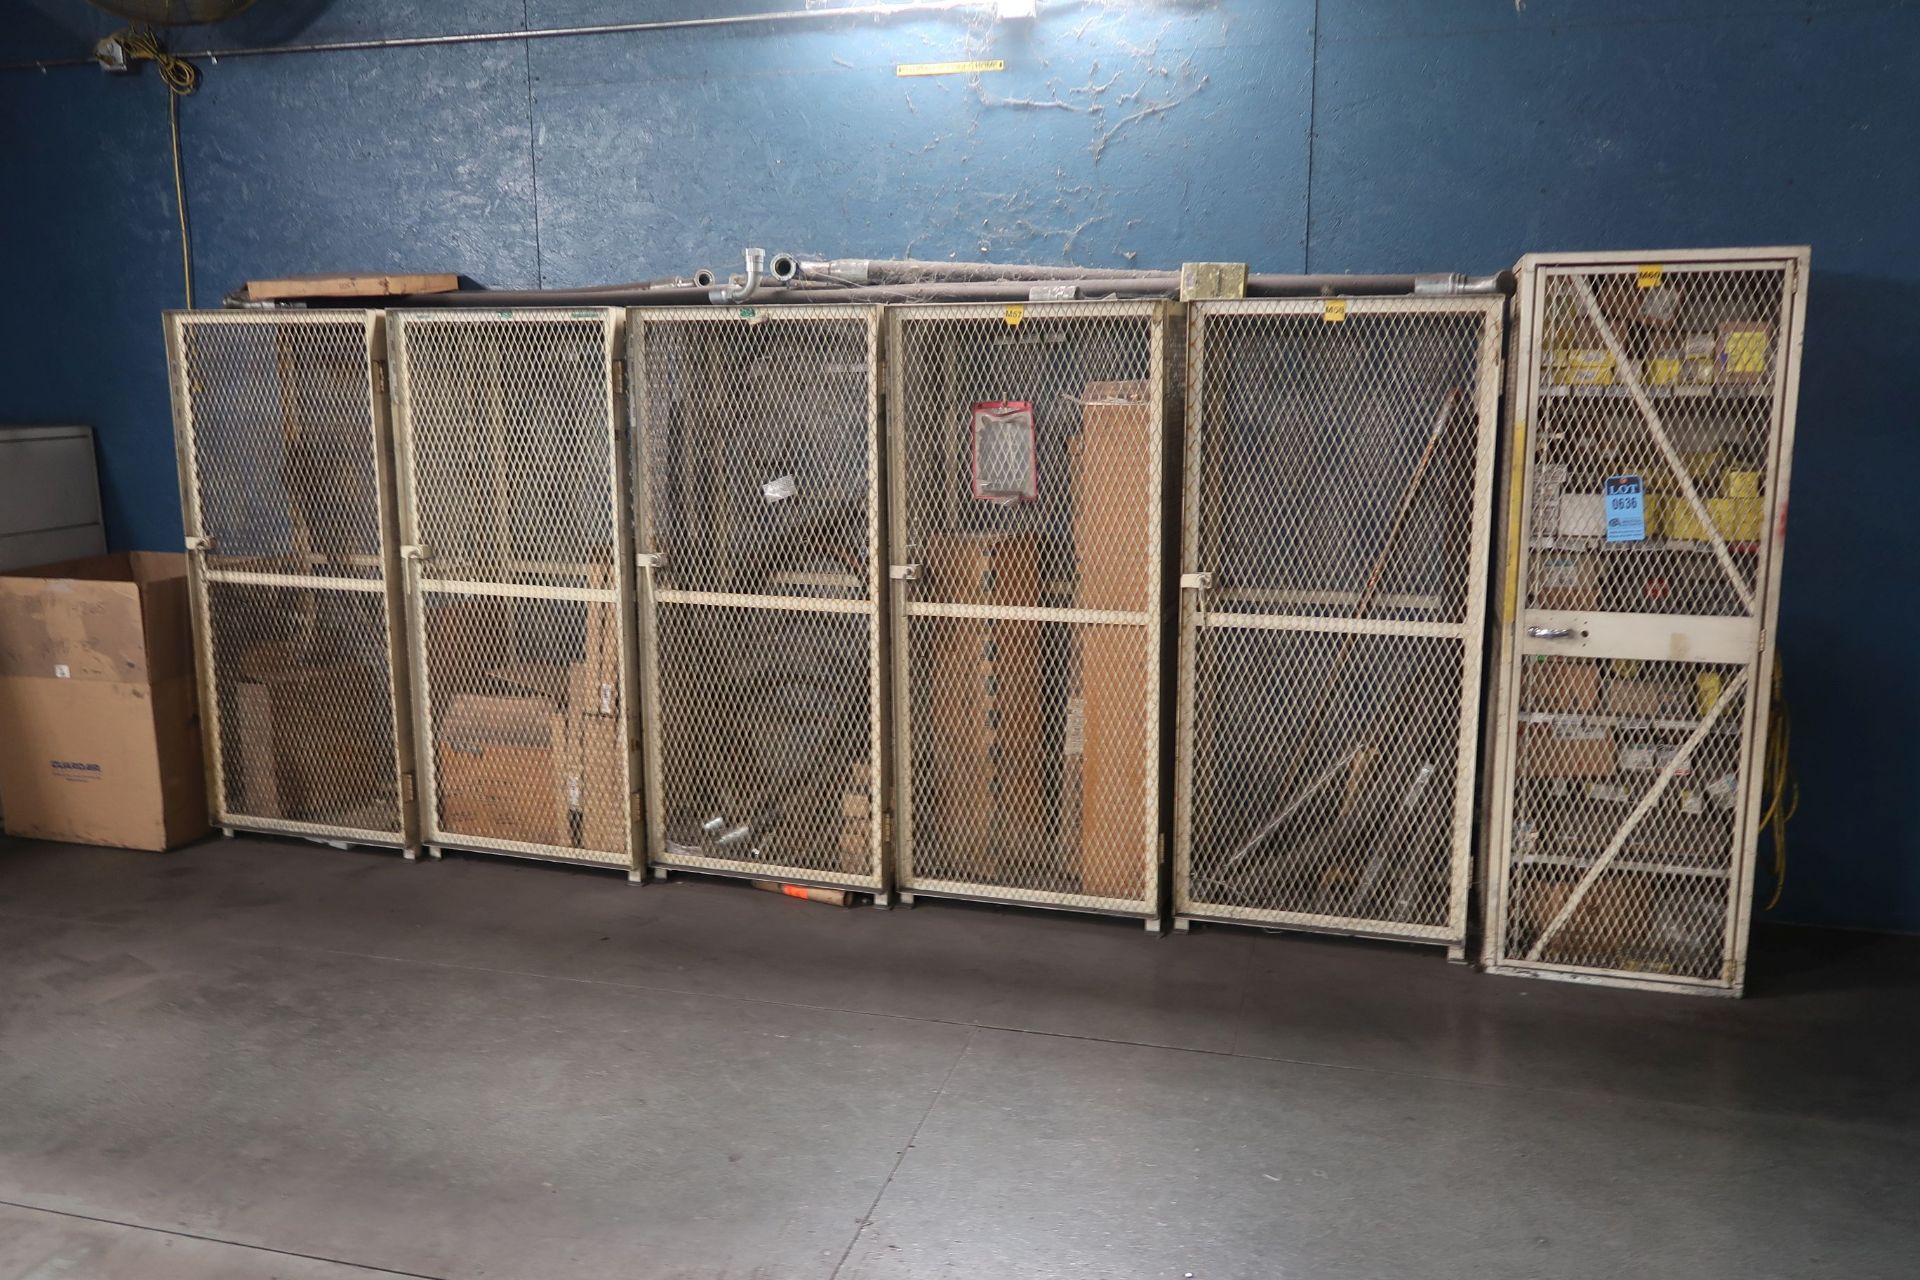 CAGE TYPE RACK WITH CONTENTS - PARTS **LOADING PRICE DUE TO ERRA - $500.00**